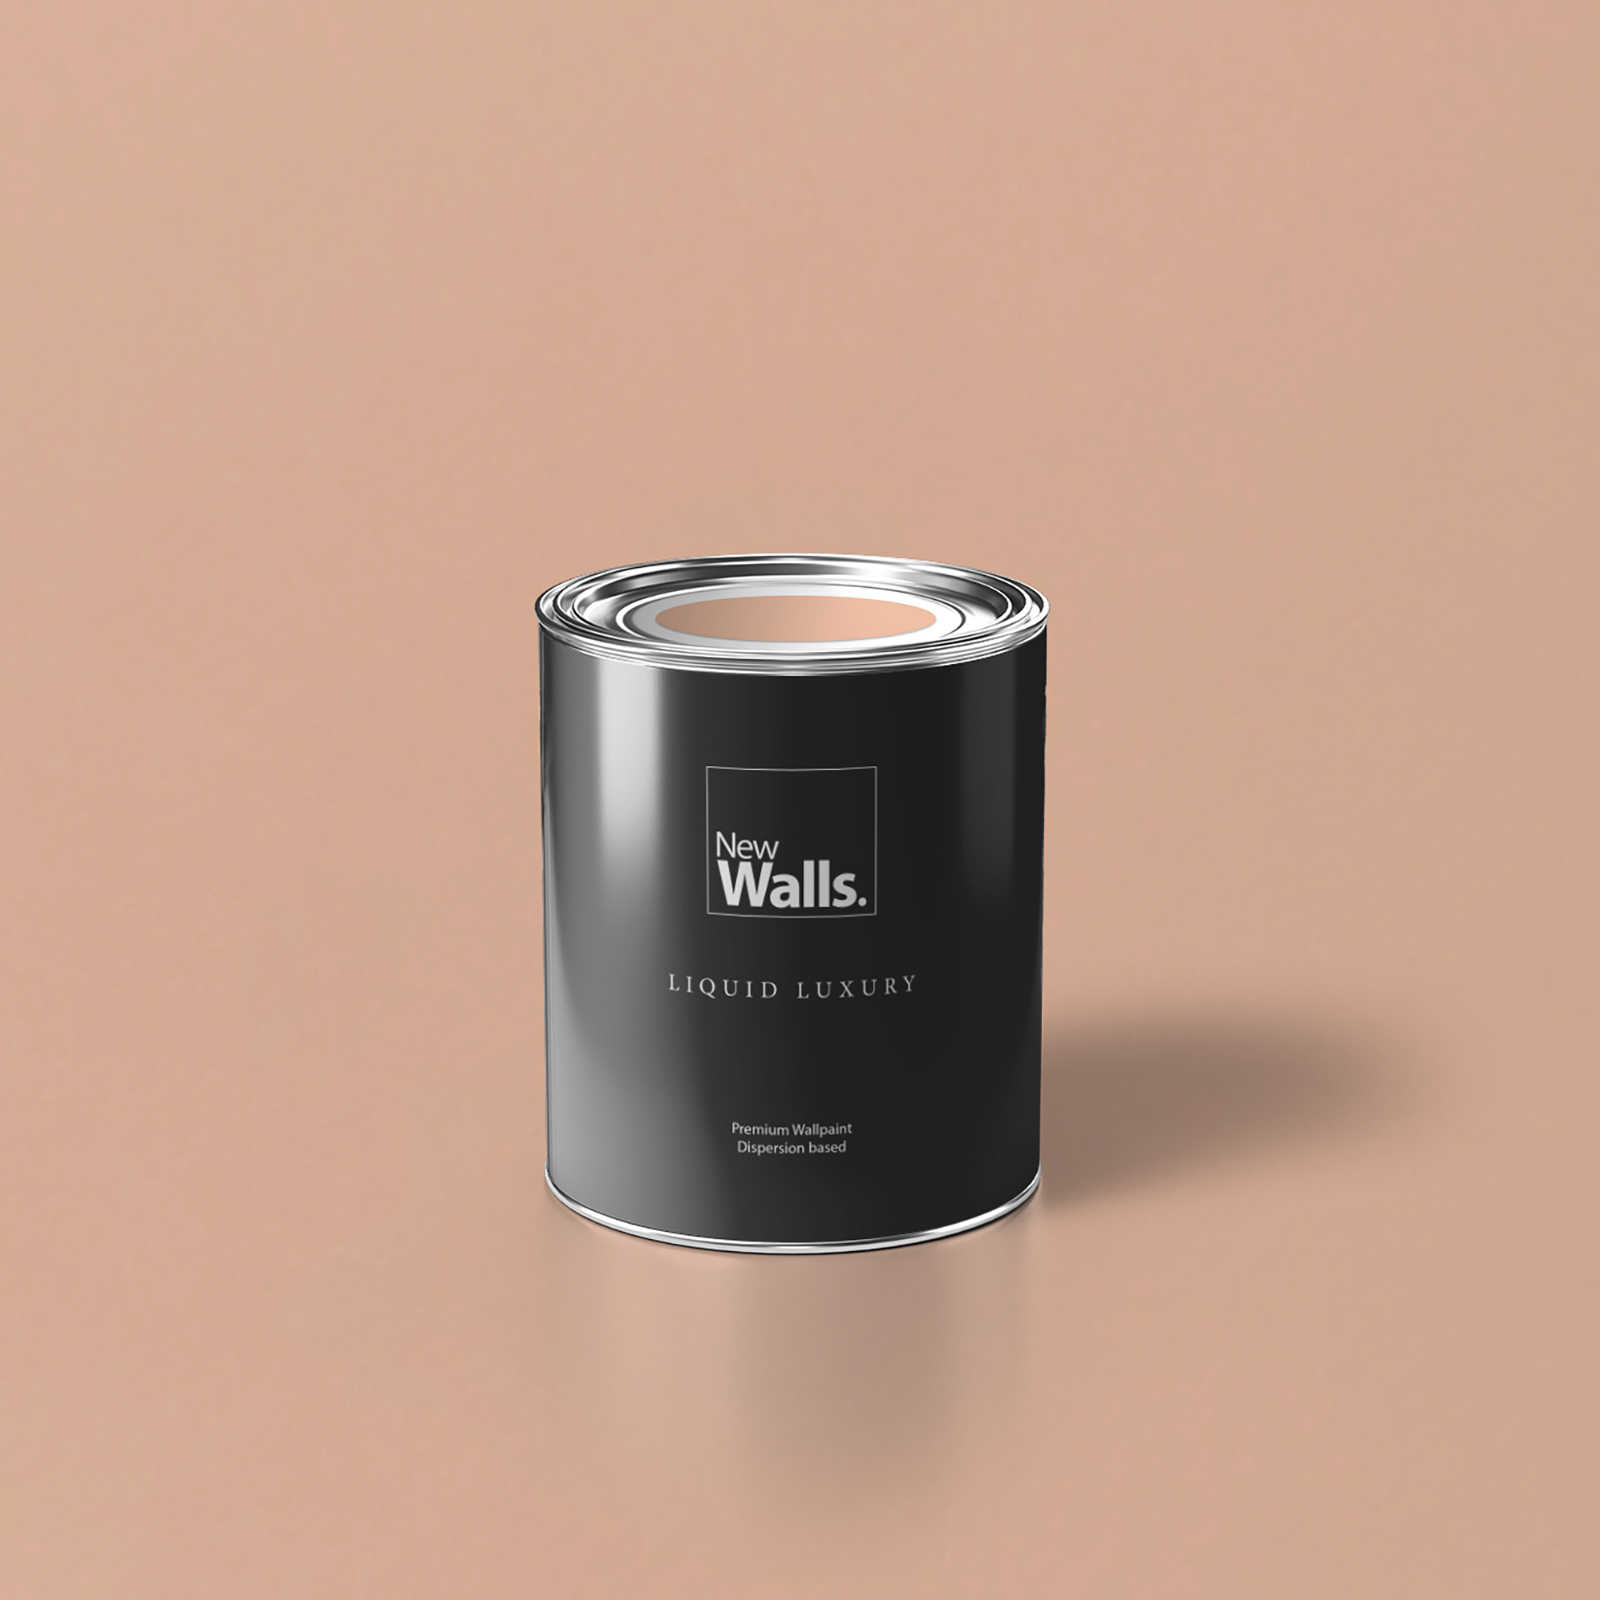         Premium Wall Paint serene salmon »Active Apricot« NW912 – 1 litre
    